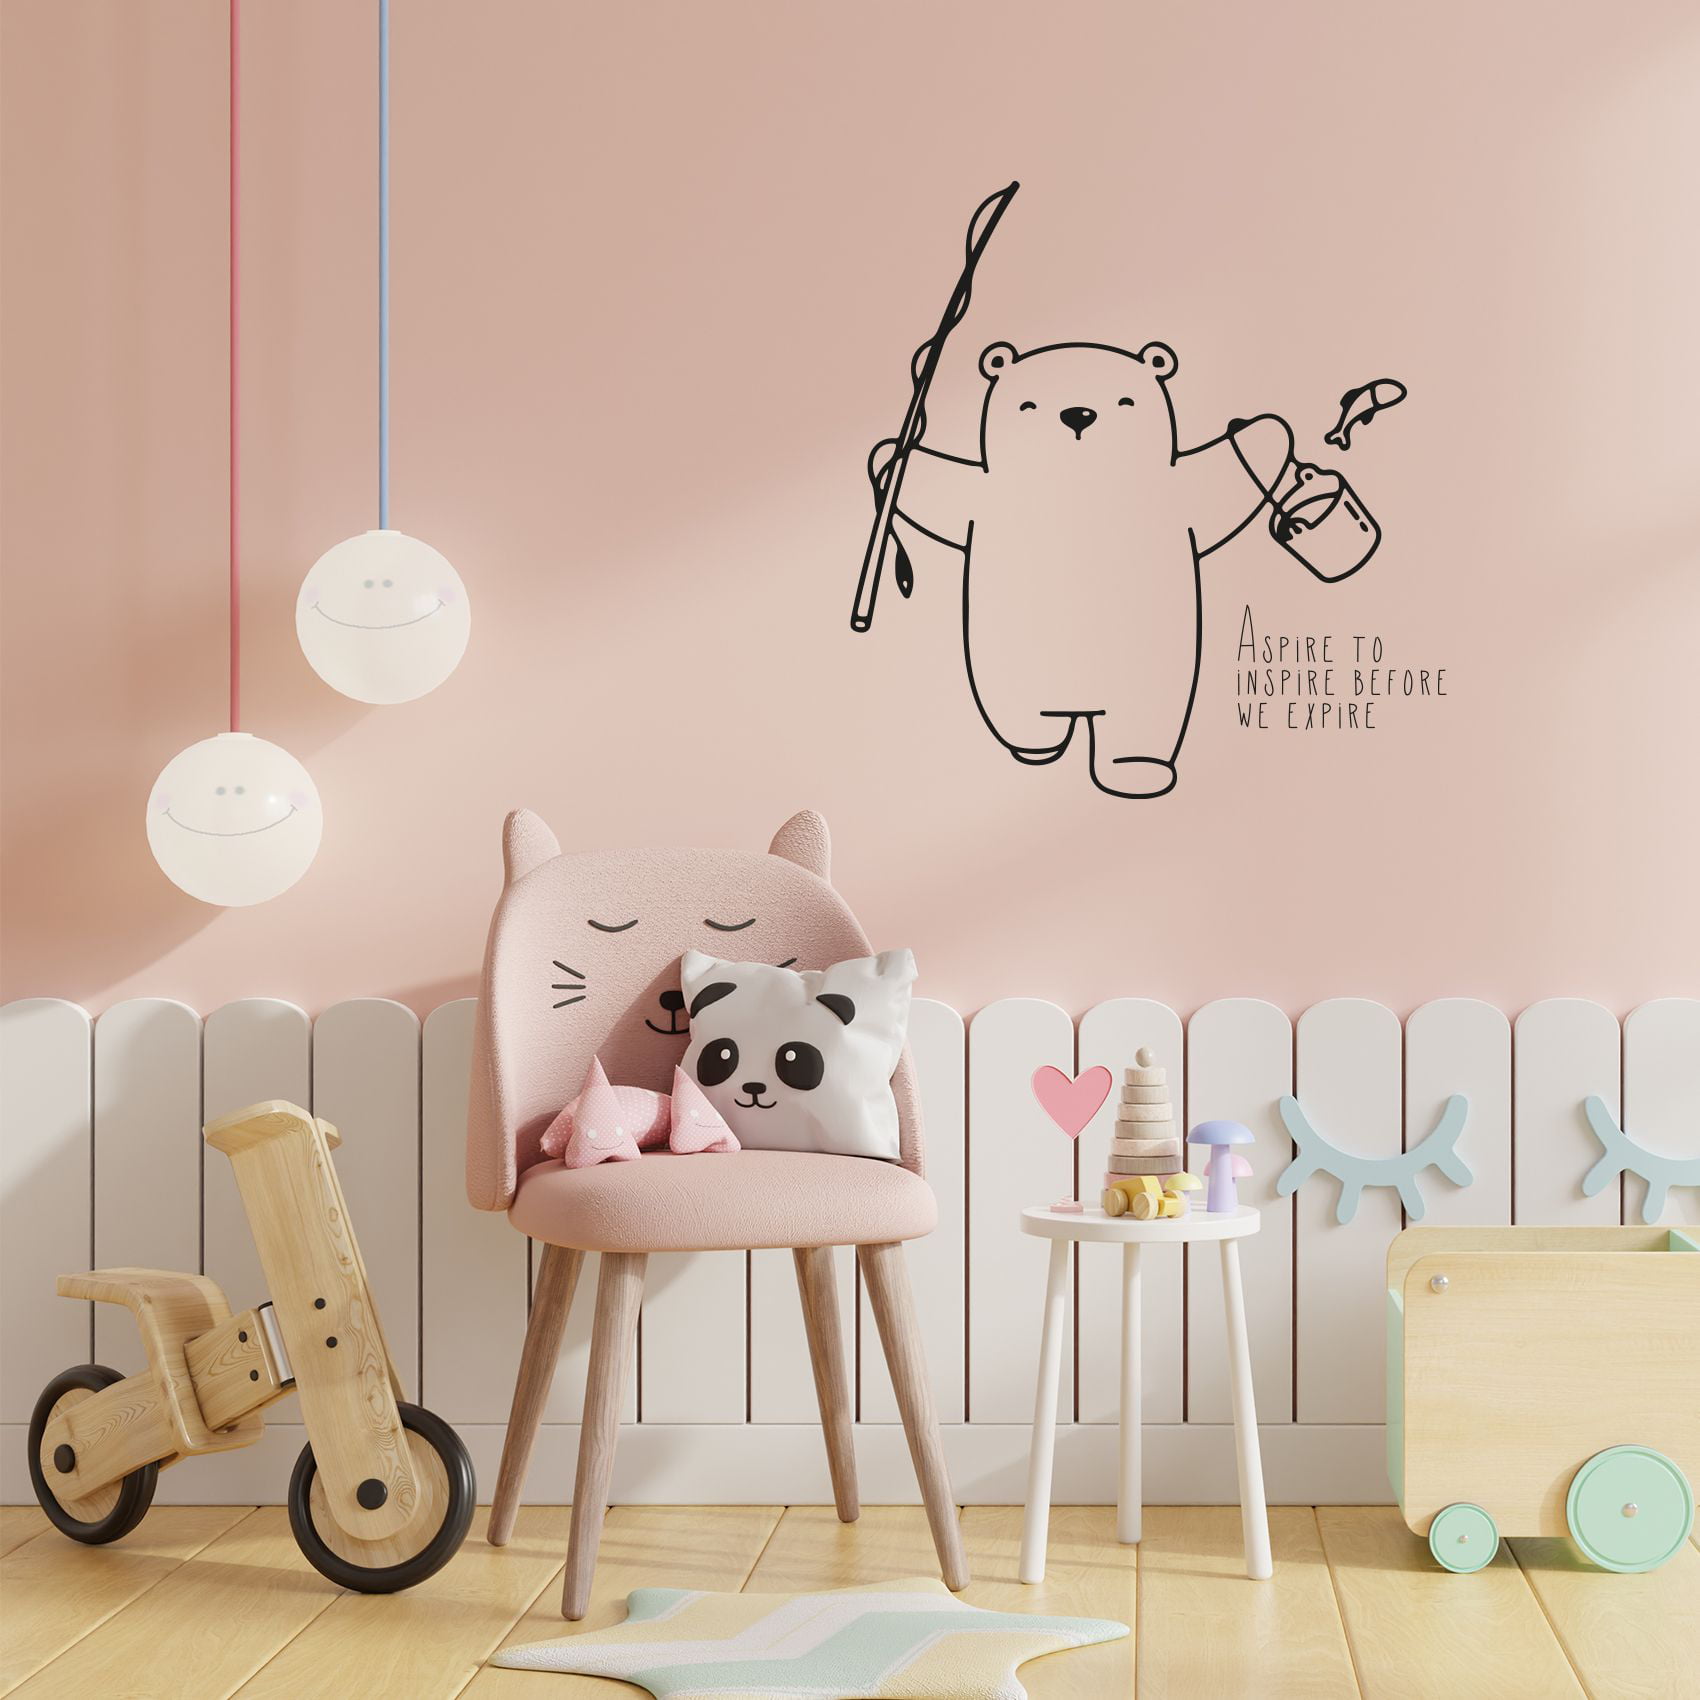 Aspire To Inspire Before You Expire - Quote Cute Polar Bear Cartoon Fishing  Silhouette Decoration Wall Sticker Art Decal Boys Girls Kids Room Design  Bedroom House Home Decor Stickers Size (20x18 inch) 